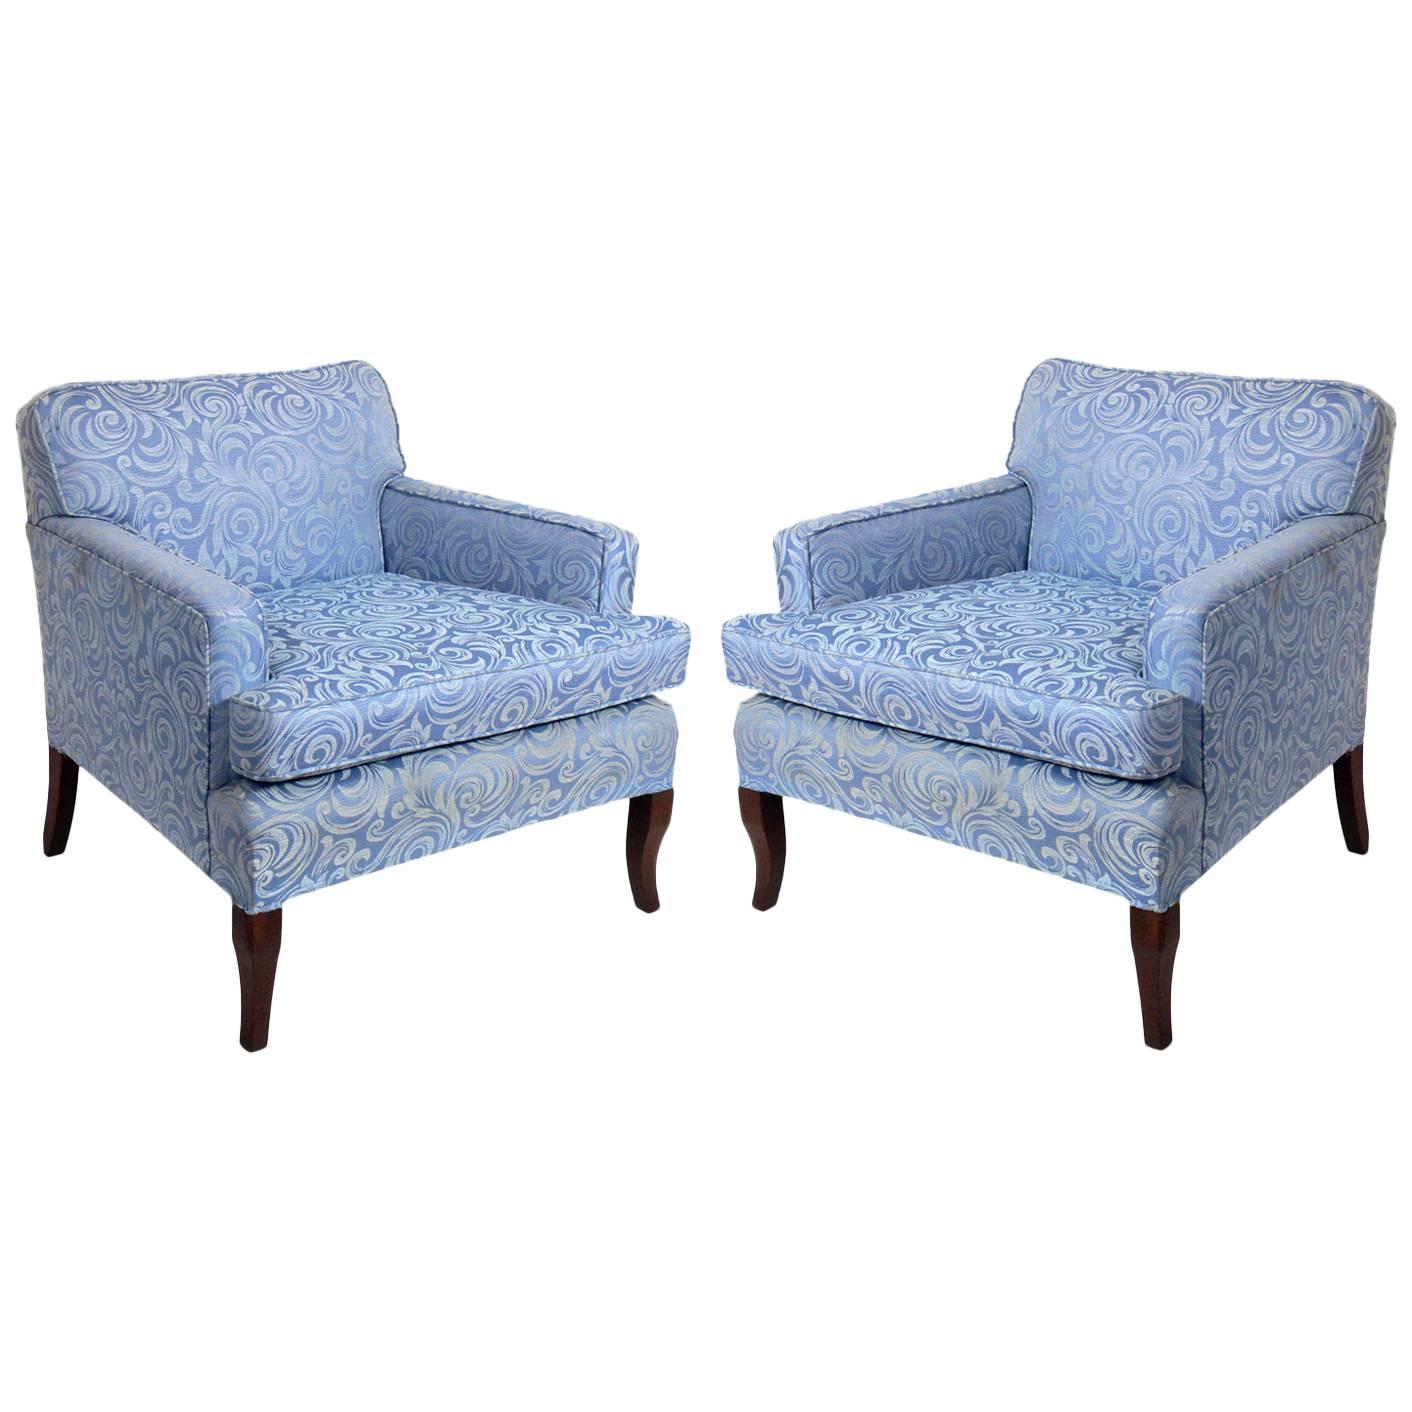 Pair of Low Slung Lounge Chairs with Curvaceous Legs